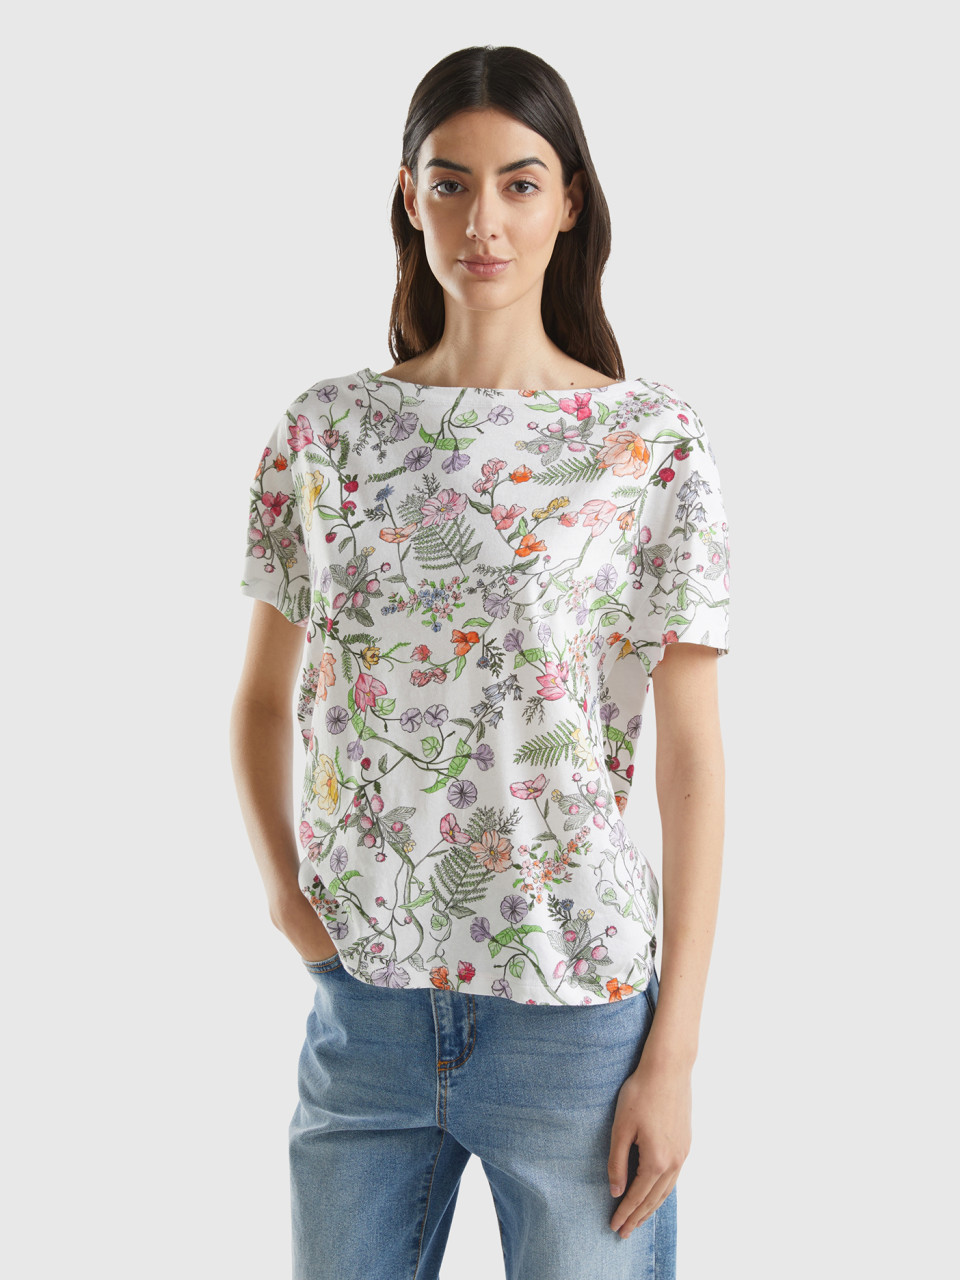 Benetton, T-shirt With Floral Print, White, Women